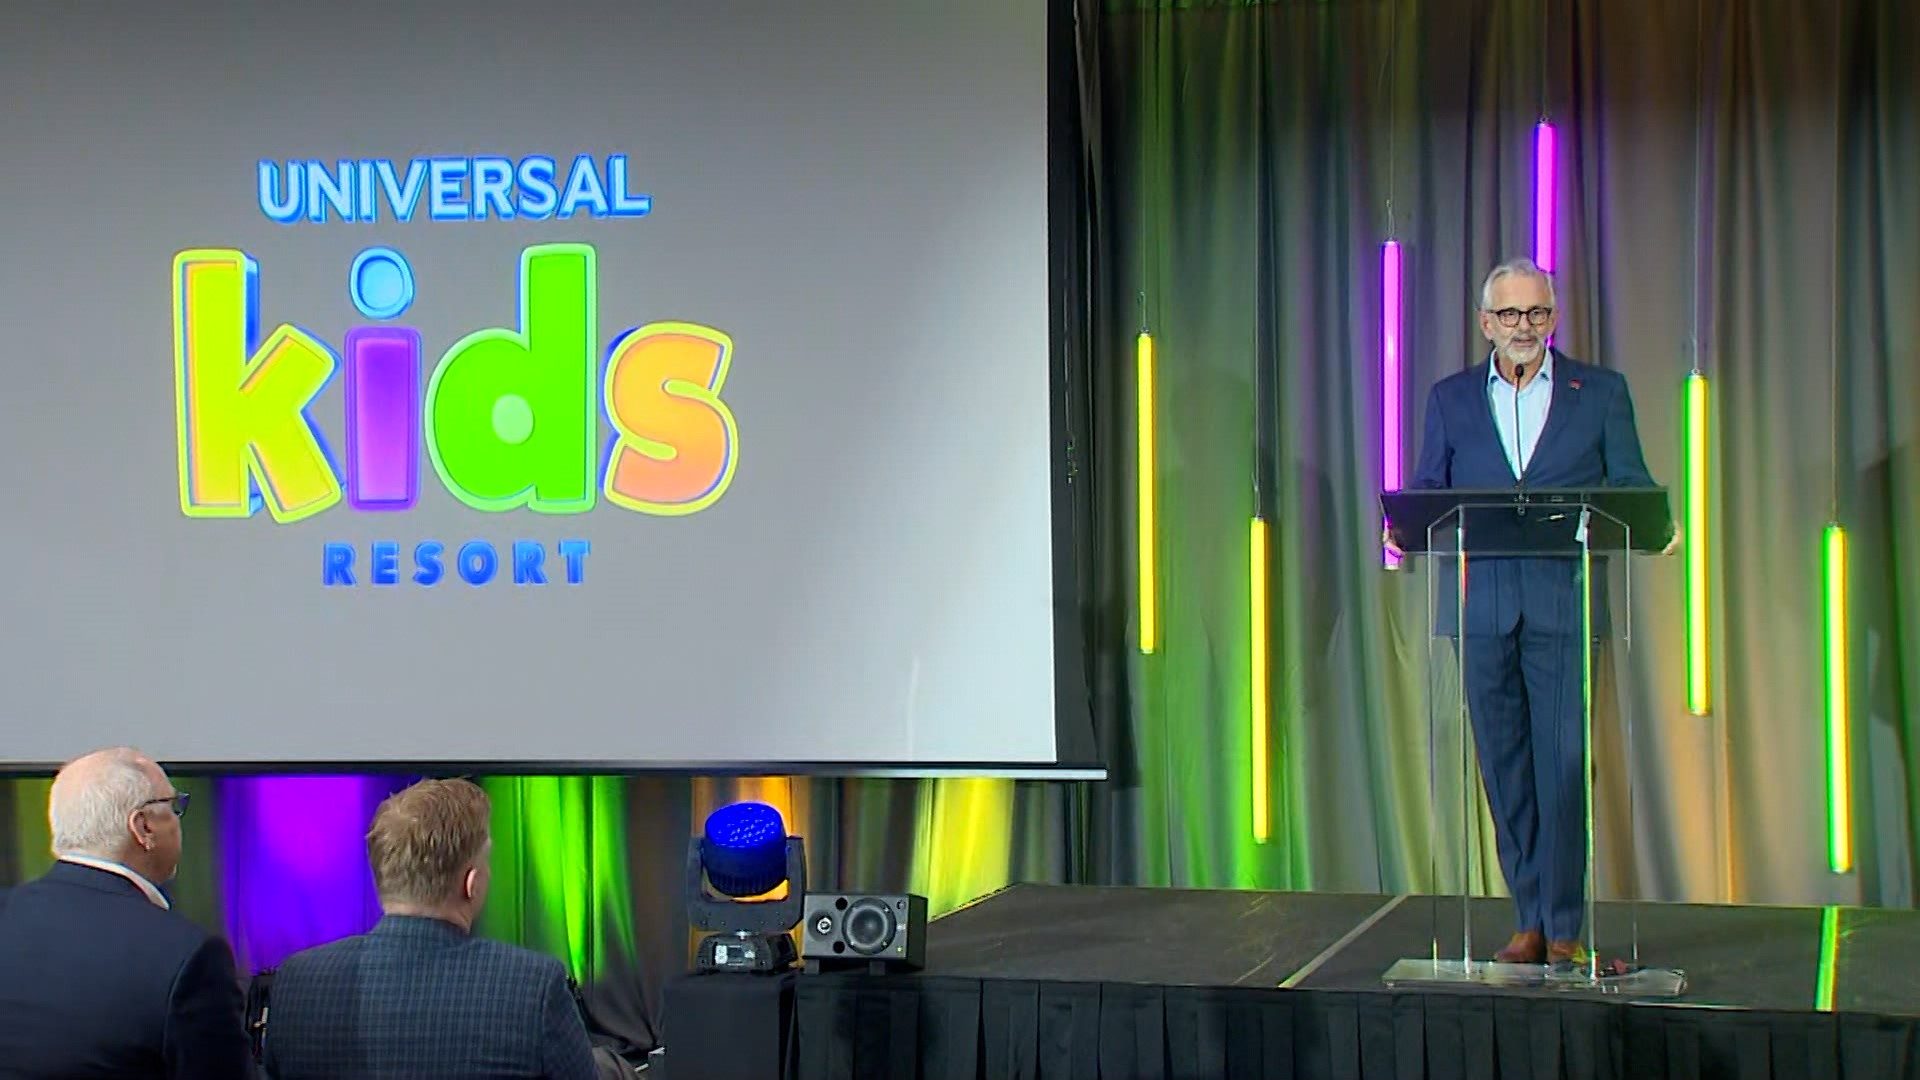 Universal and Frisco city officials held a press conference Friday to announce the name and logo for the forthcoming Universal Kids Resort.